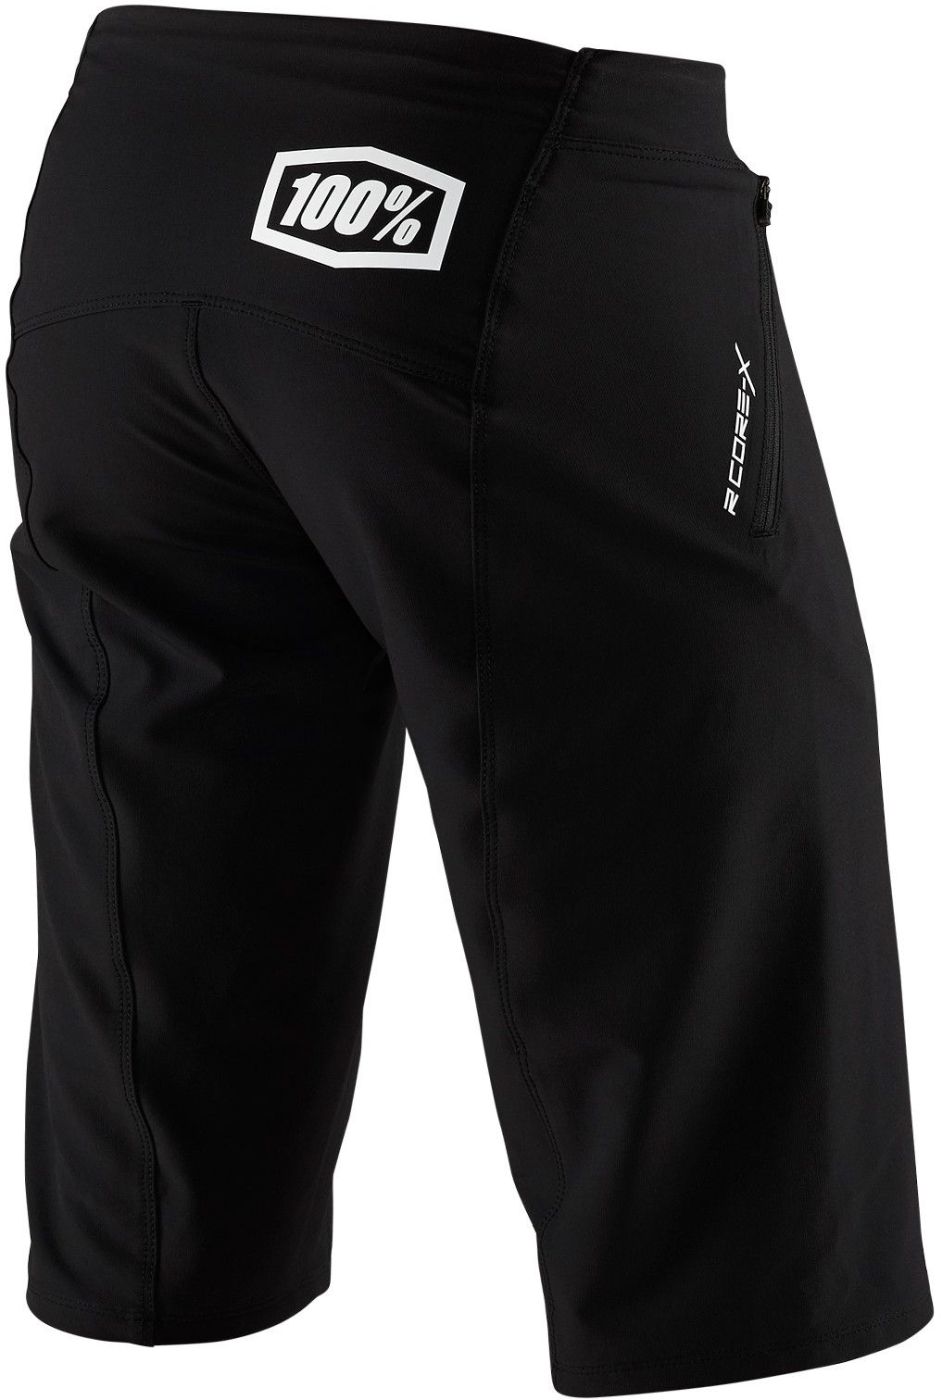 100% R-Core X Baggy Shorts - Shorts - Cycle SuperStore